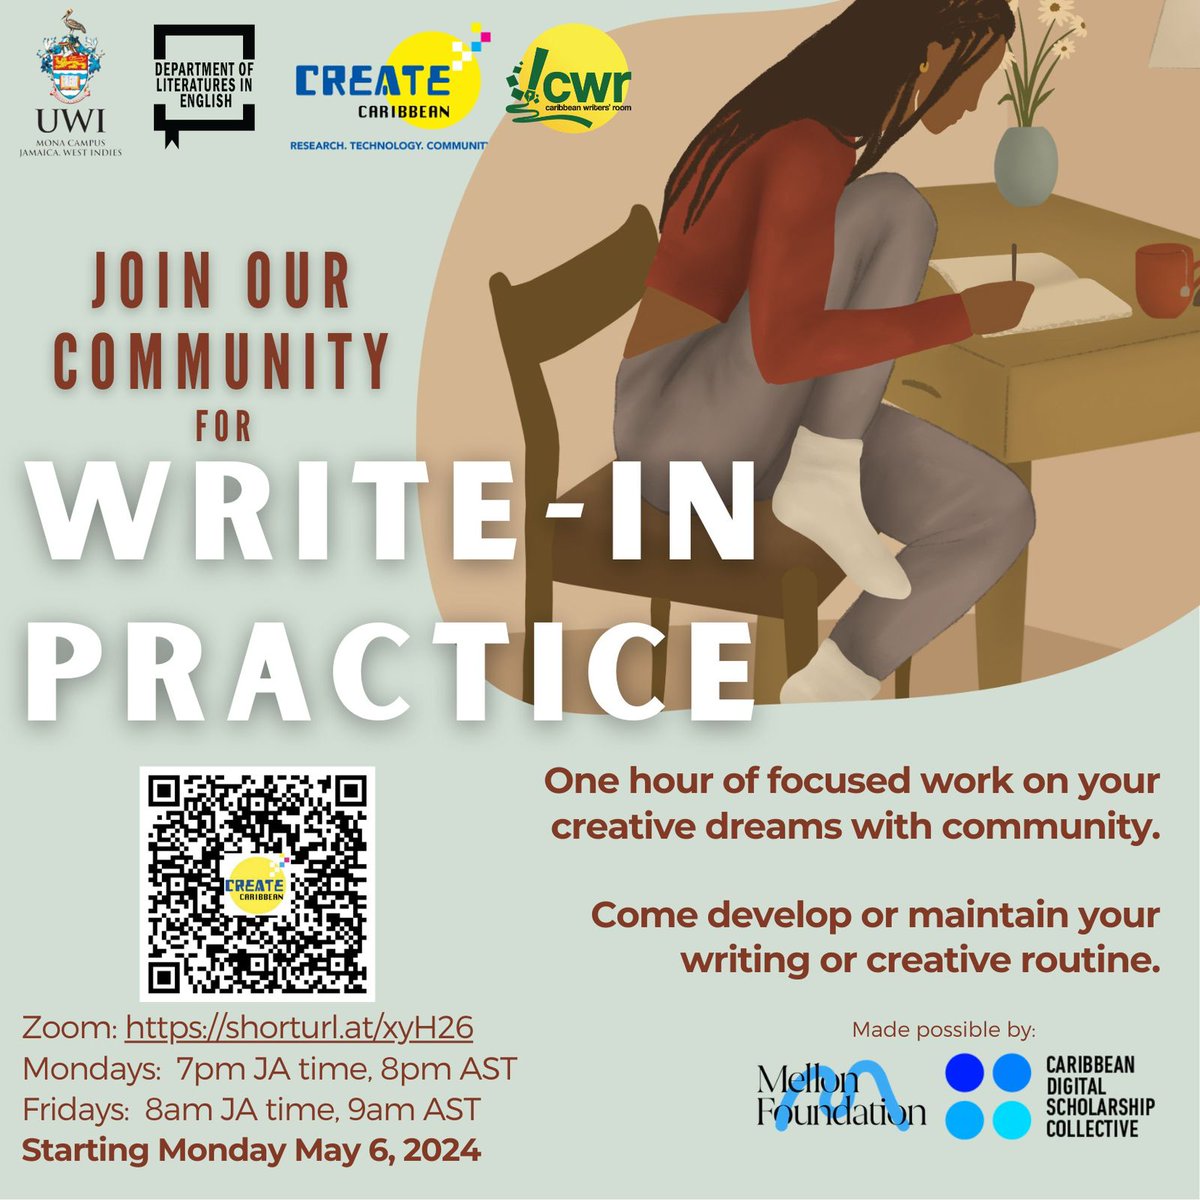 Ready to build a steady #writing habit? 
Join us as we build community and get into a routing for Write-In Practice. Use the link or QR code to join our first session tonight! Next meeting is on Friday morning. 
Come write with us at the #CaribbeanWriters’ Room! ✍️

#Caribbean